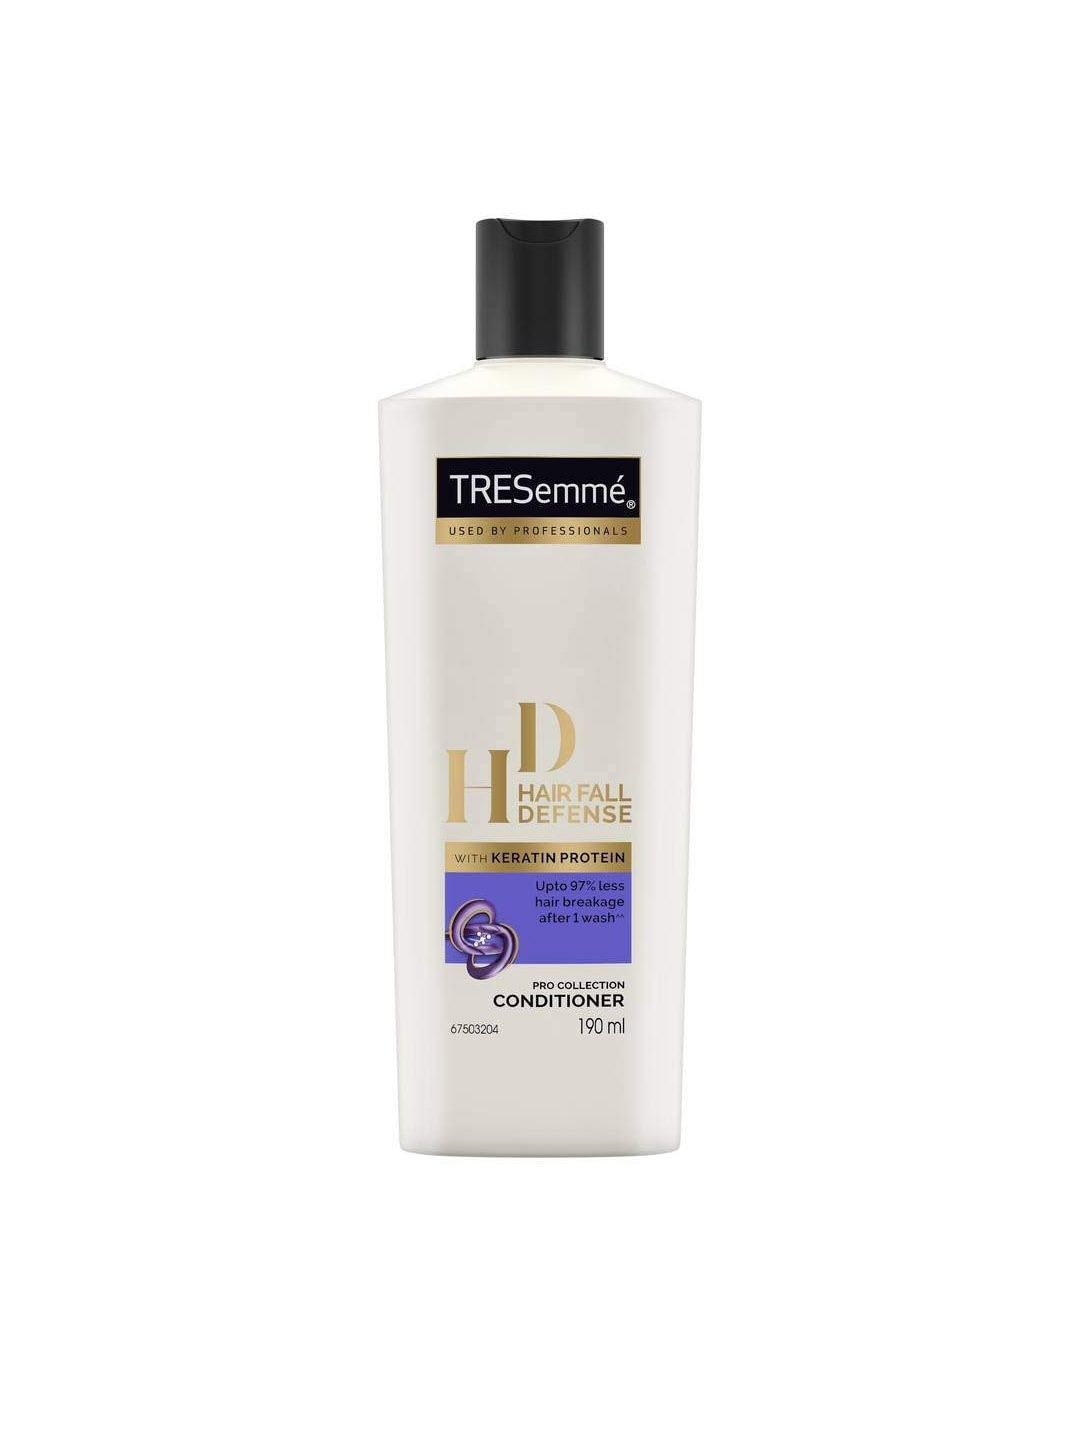 TRESemme Women Hair Fall Defense Conditioner 190 ml Price in India